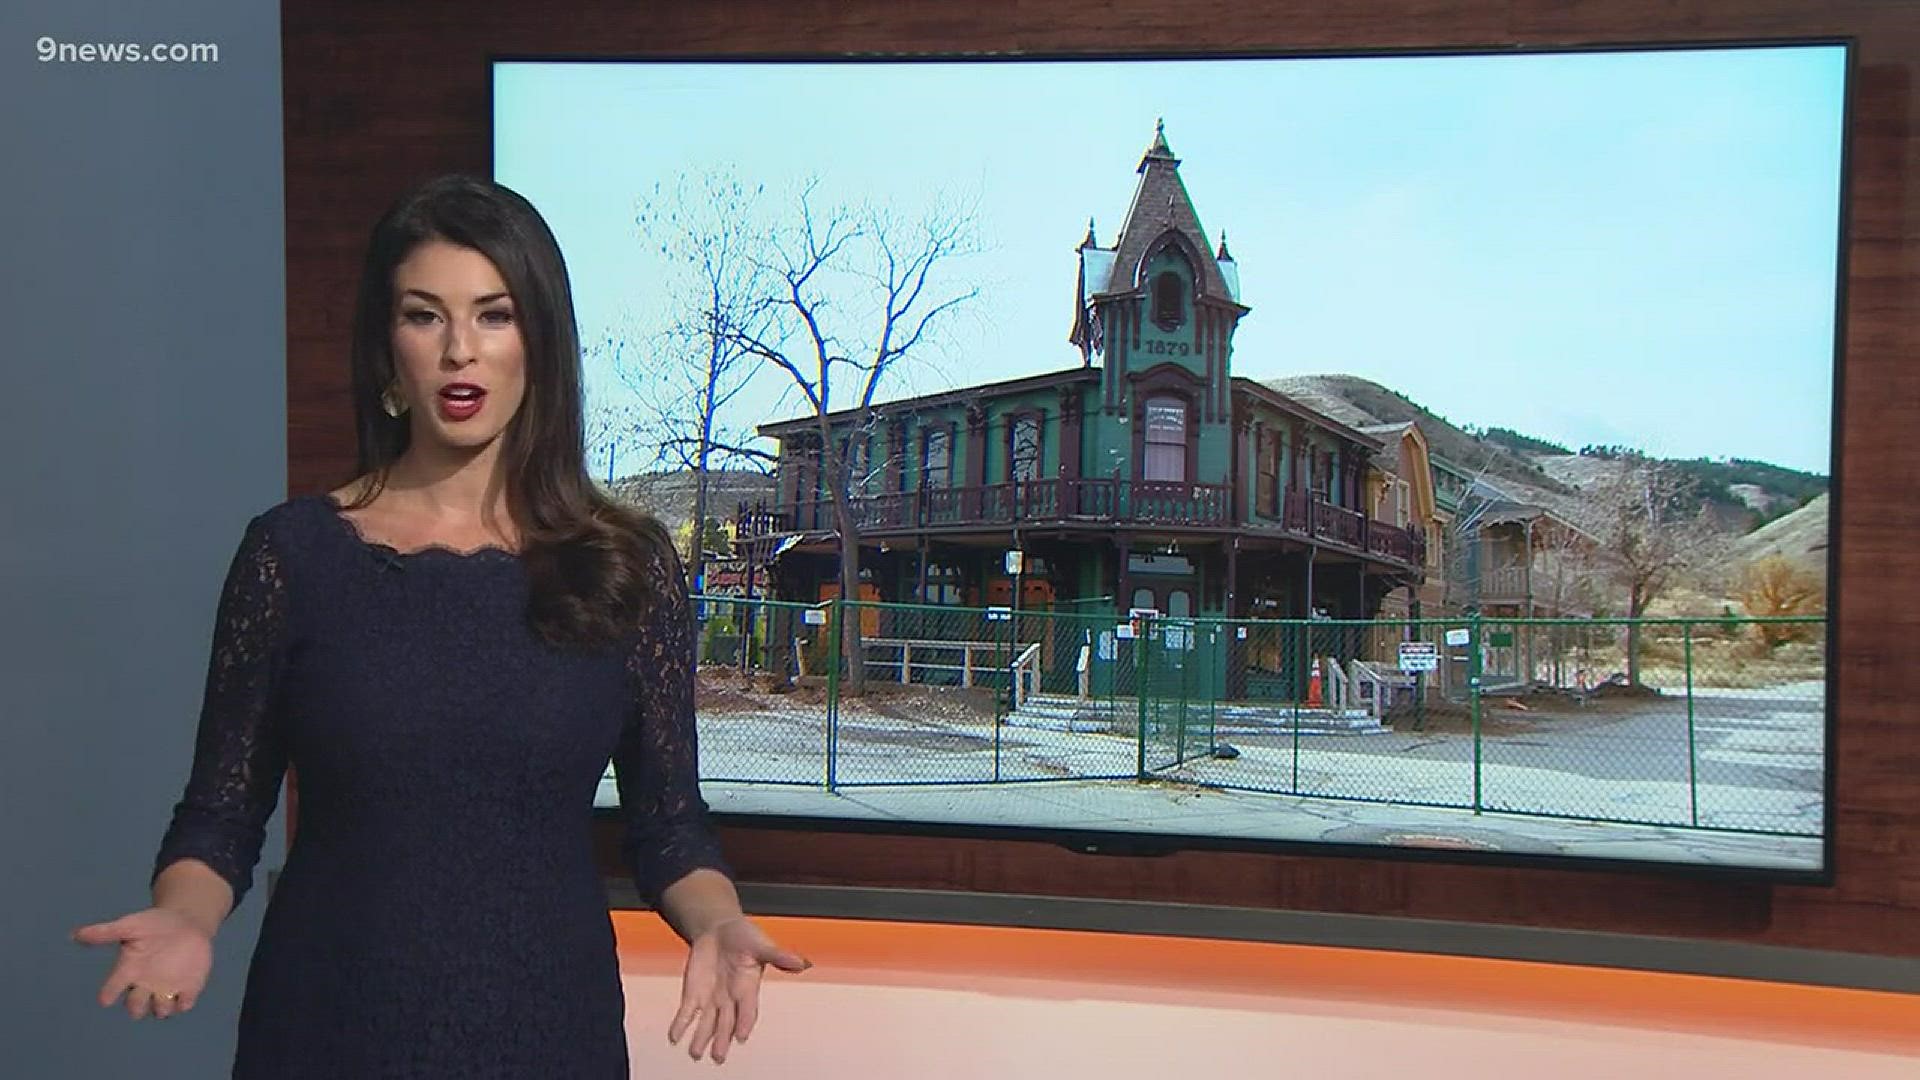 Everything at the former Heritage Square Amusement park must go. This morning everything is up for auction including rides, benches, arcade games, and food carts.